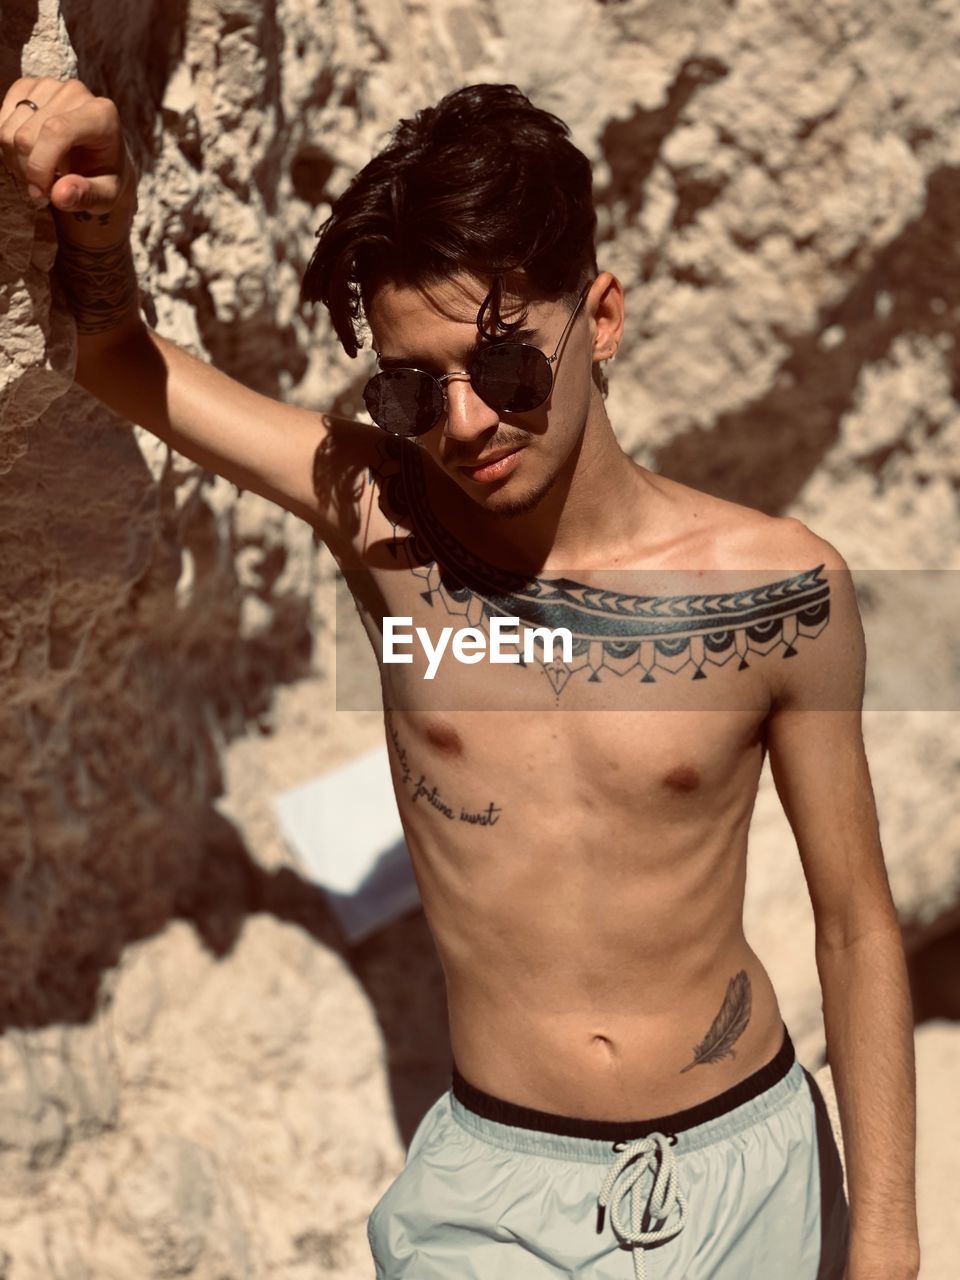 Shirtless man with tattoo wearing sunglasses leaning on rock formation